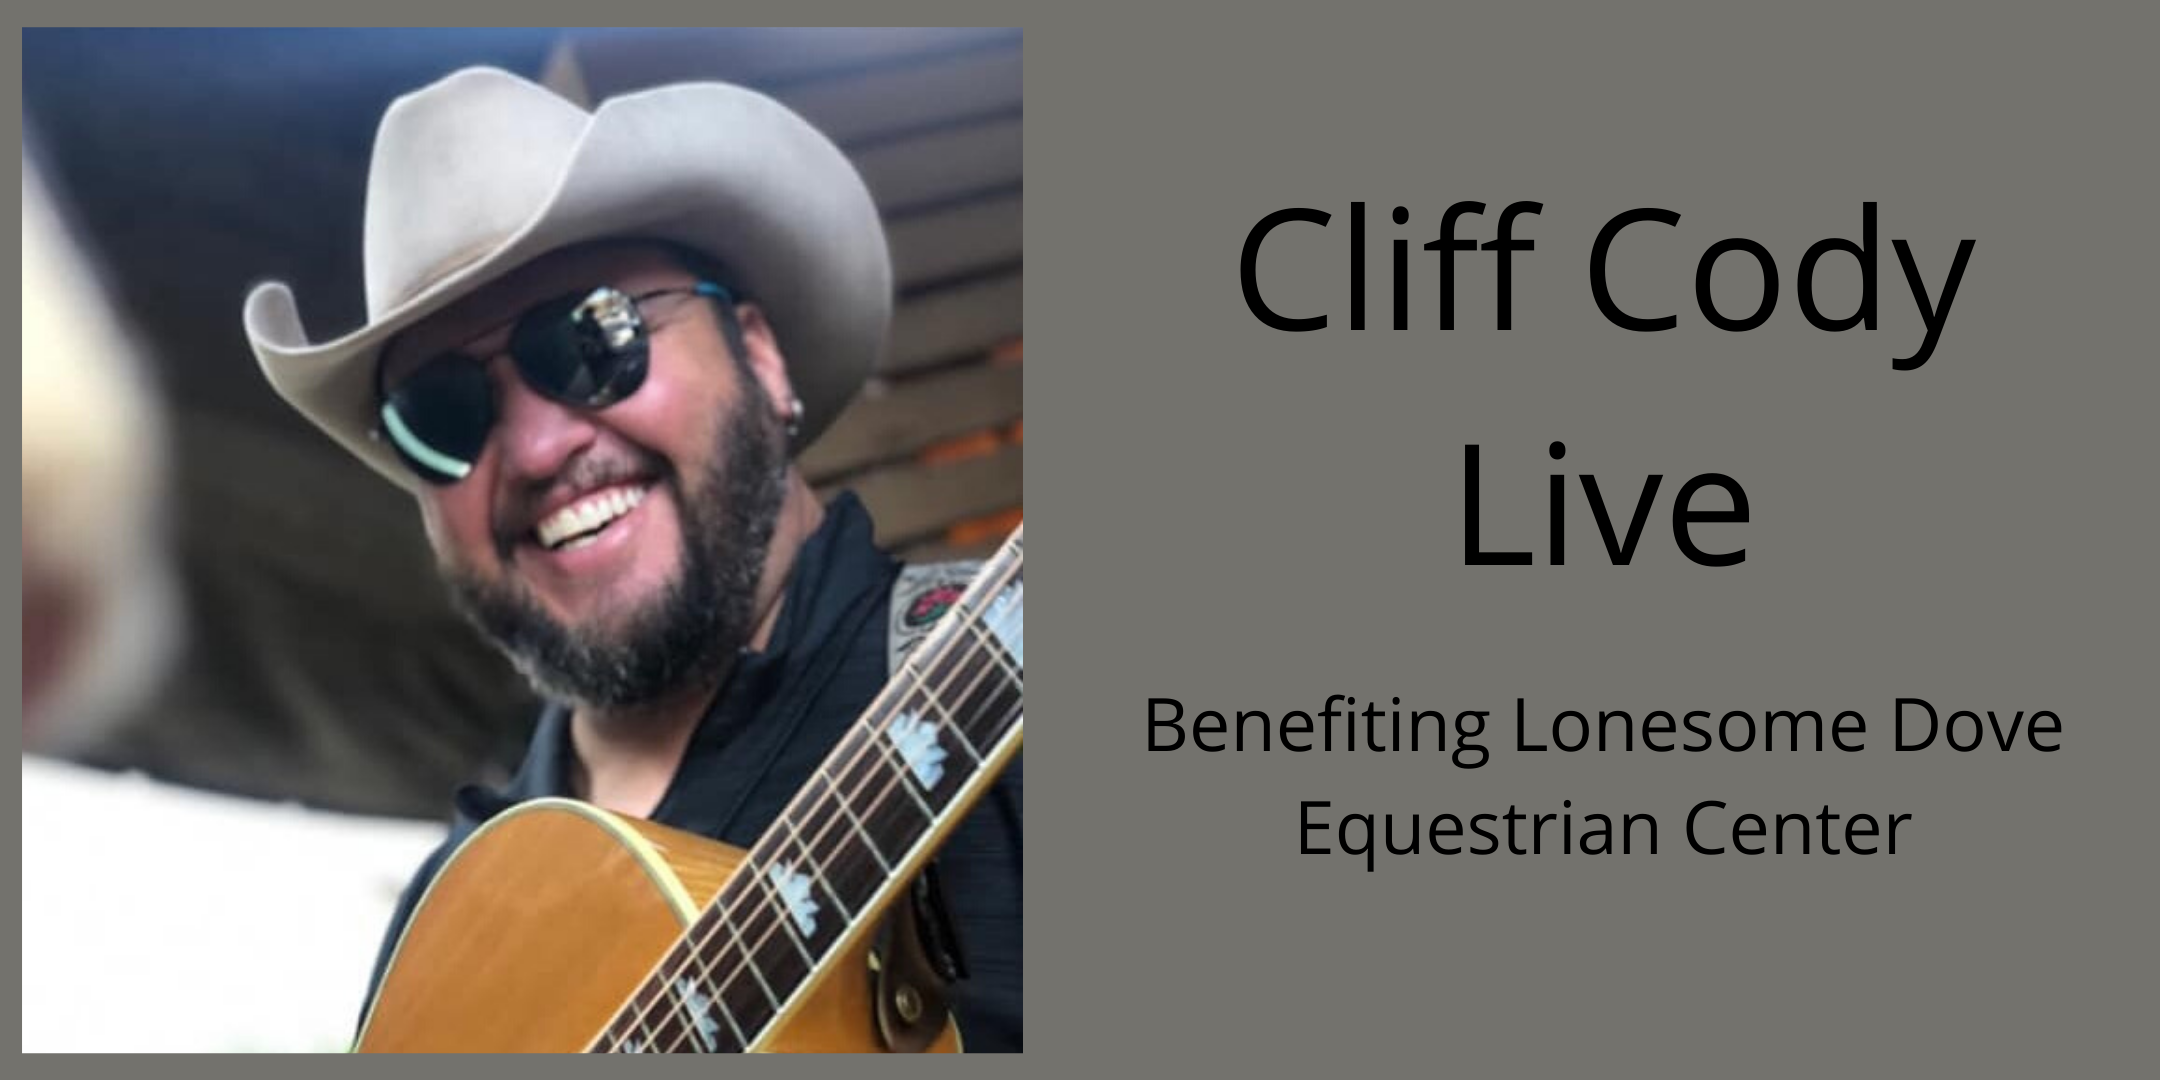 Live Music with Cliff Cody in support of Lonesome Dove Equestrian Center